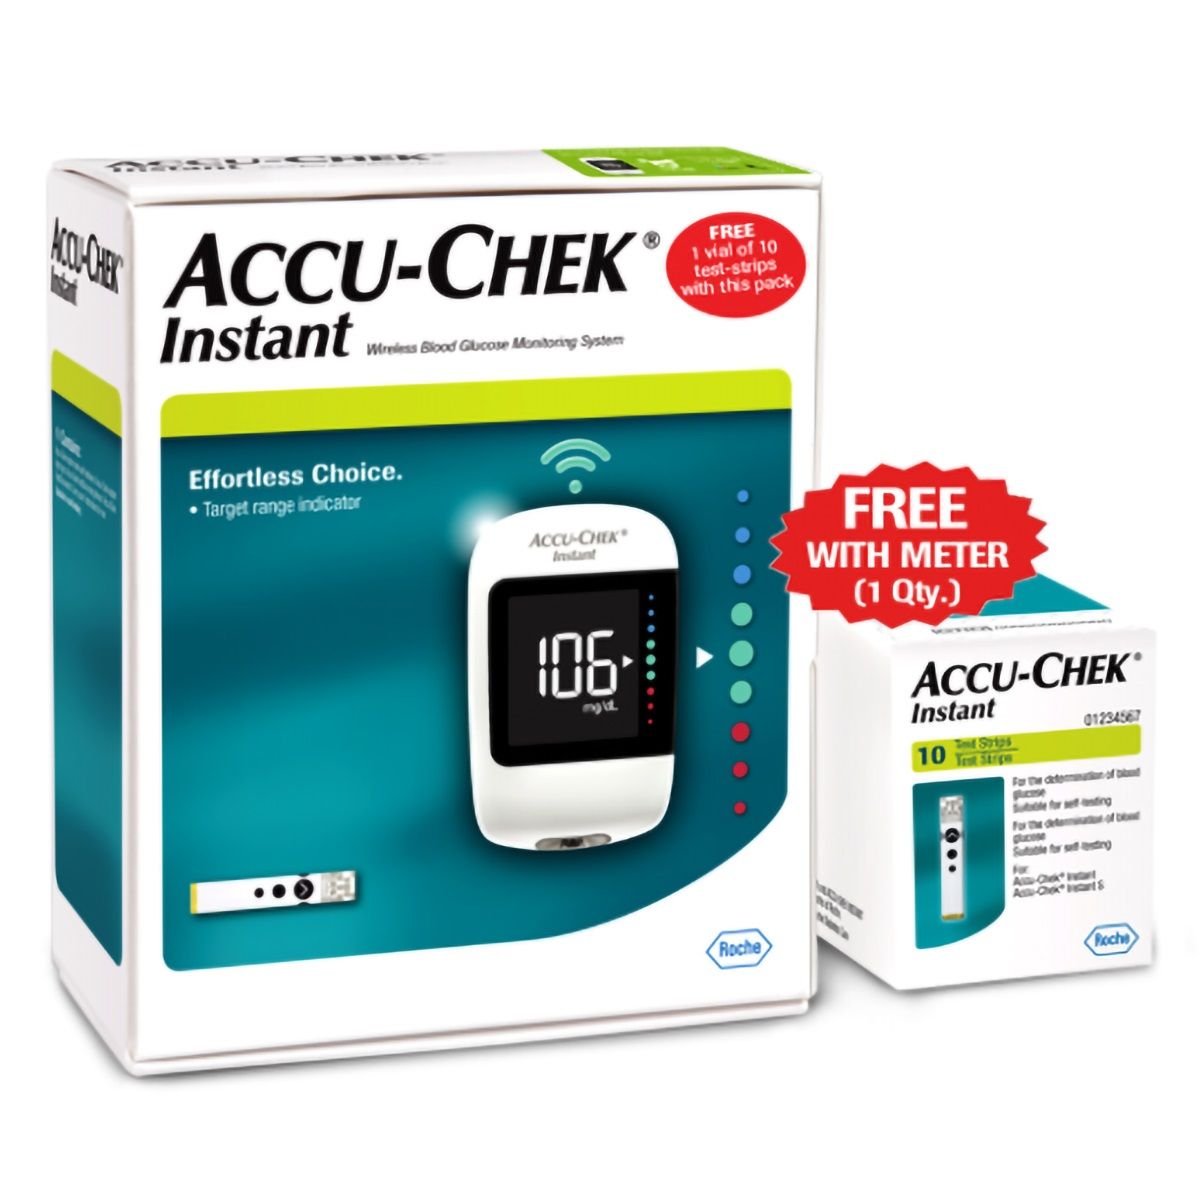 Buy Accu-Chek Instant Wireless Blood Glucose Monitoring System With 10 Free Test Strips, 1 Kit Online